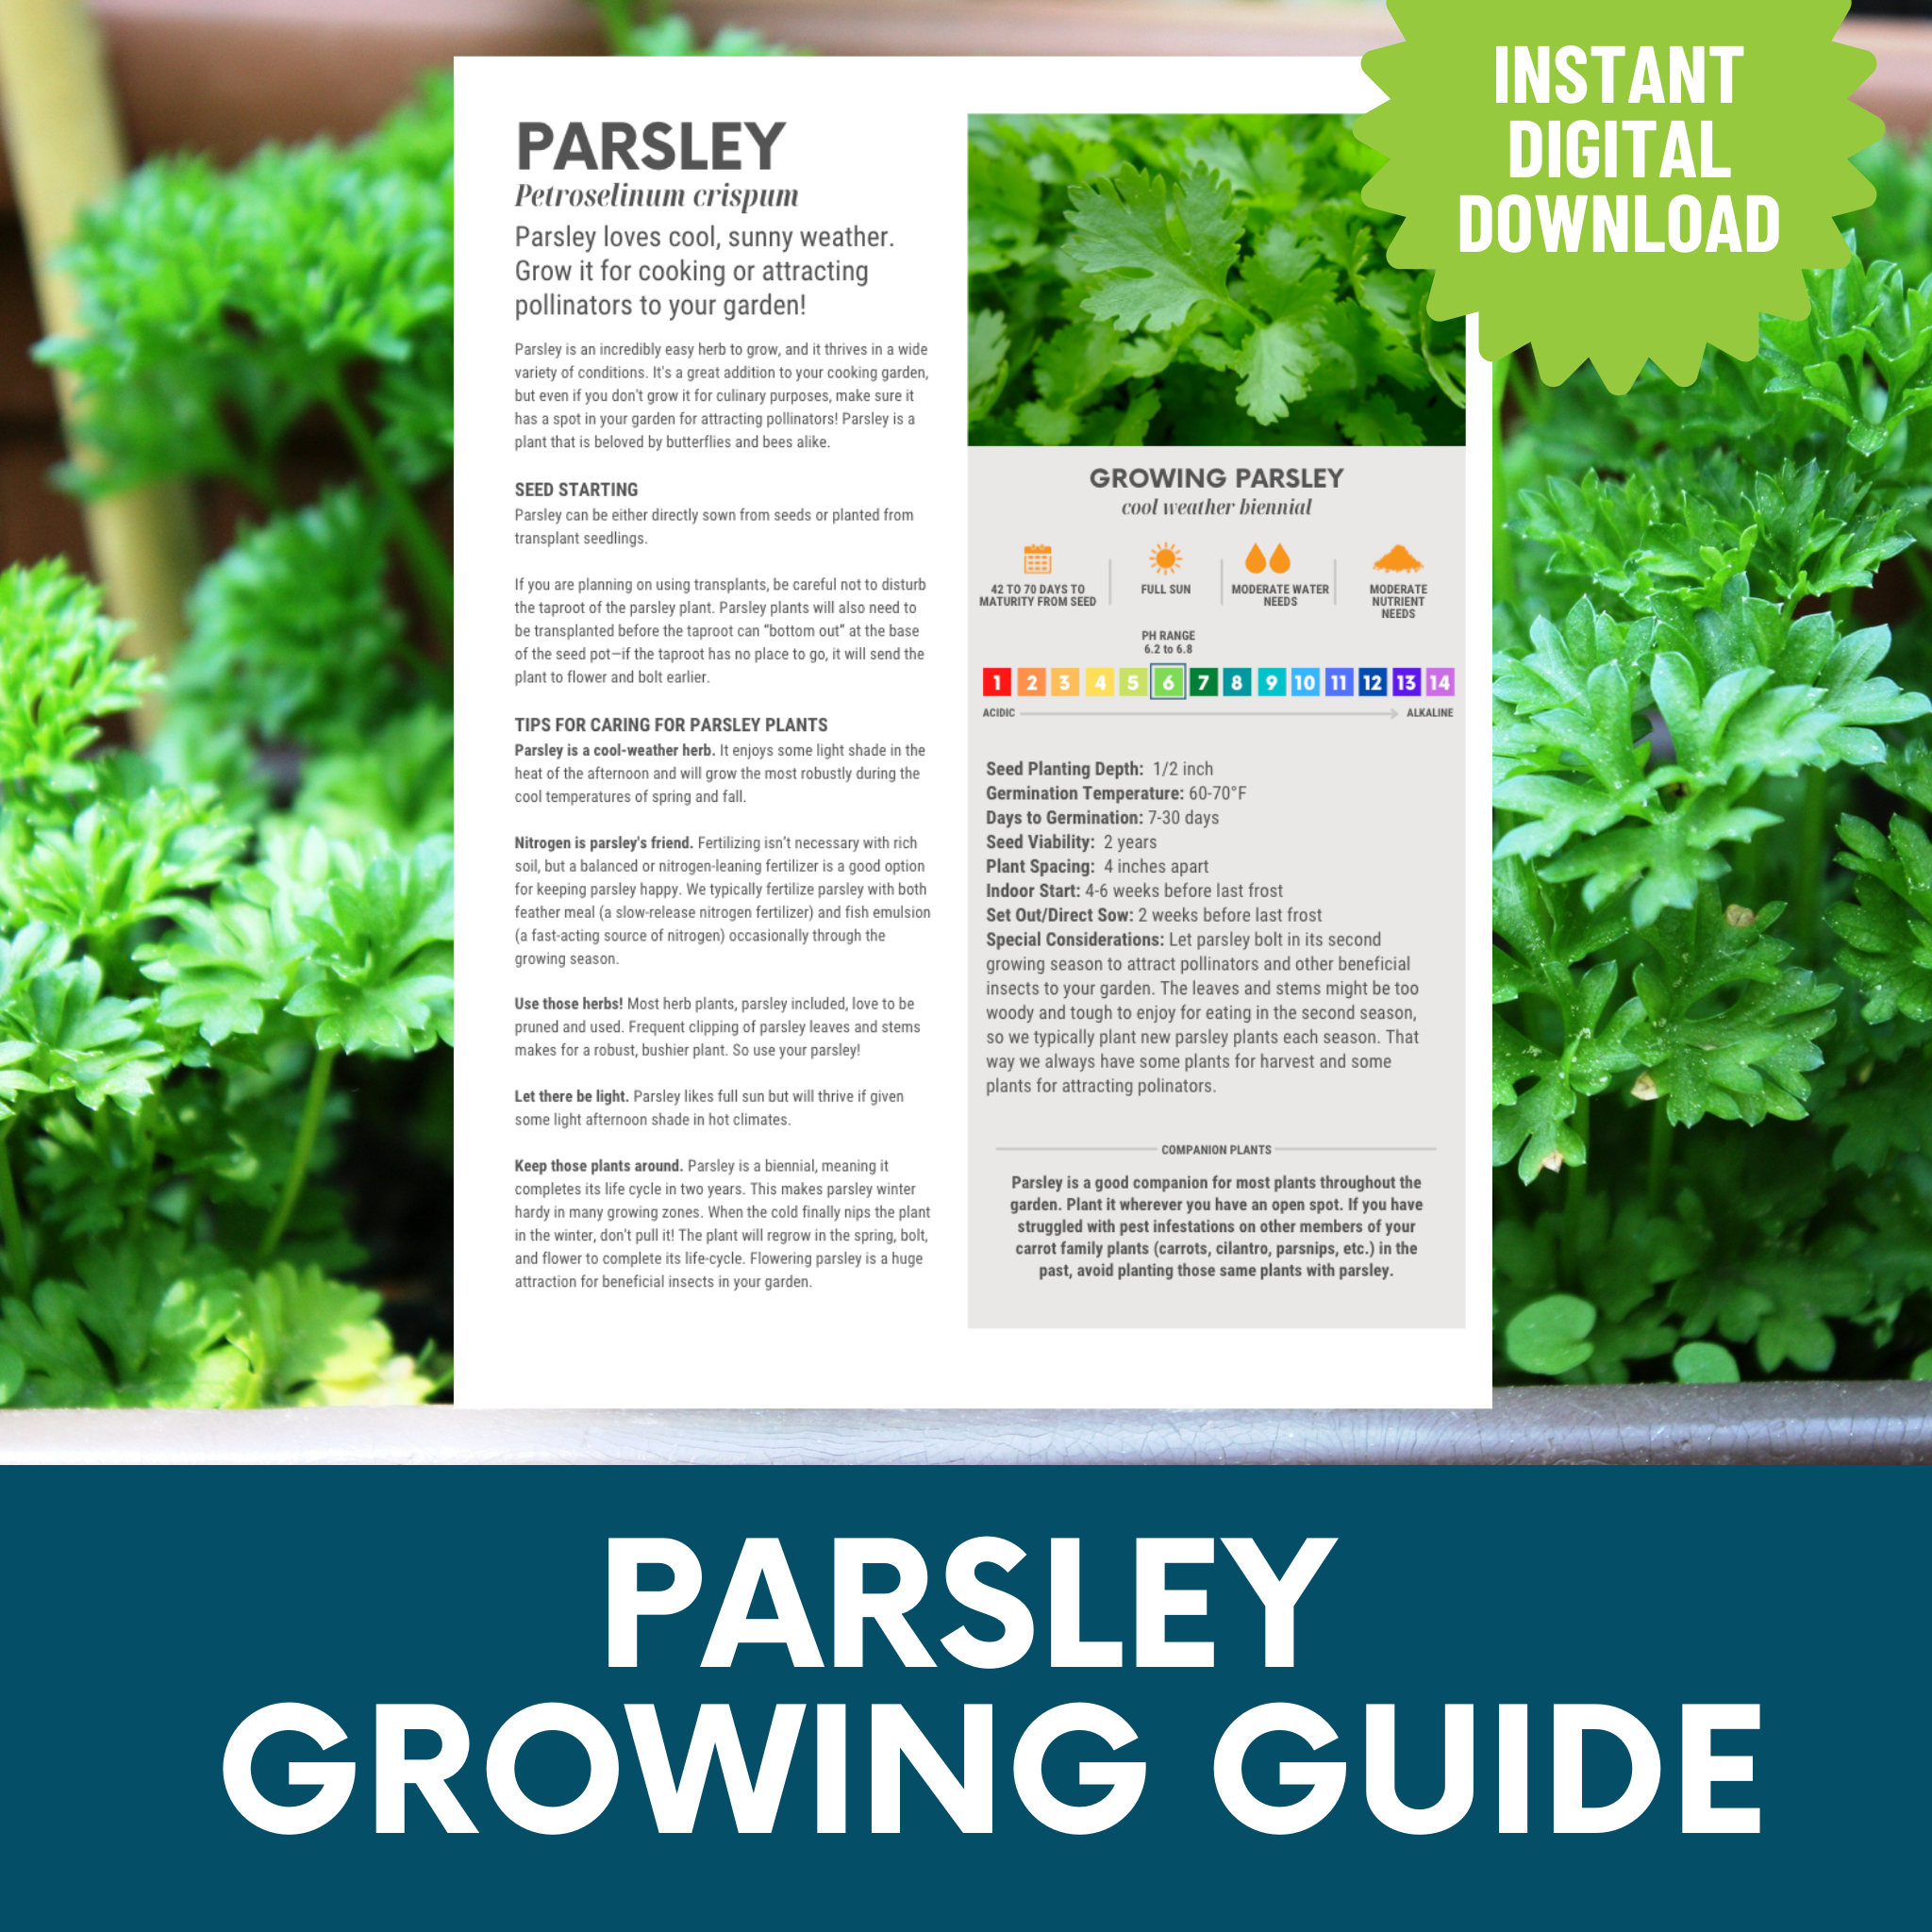 One-Sheet Printable Growing Guides